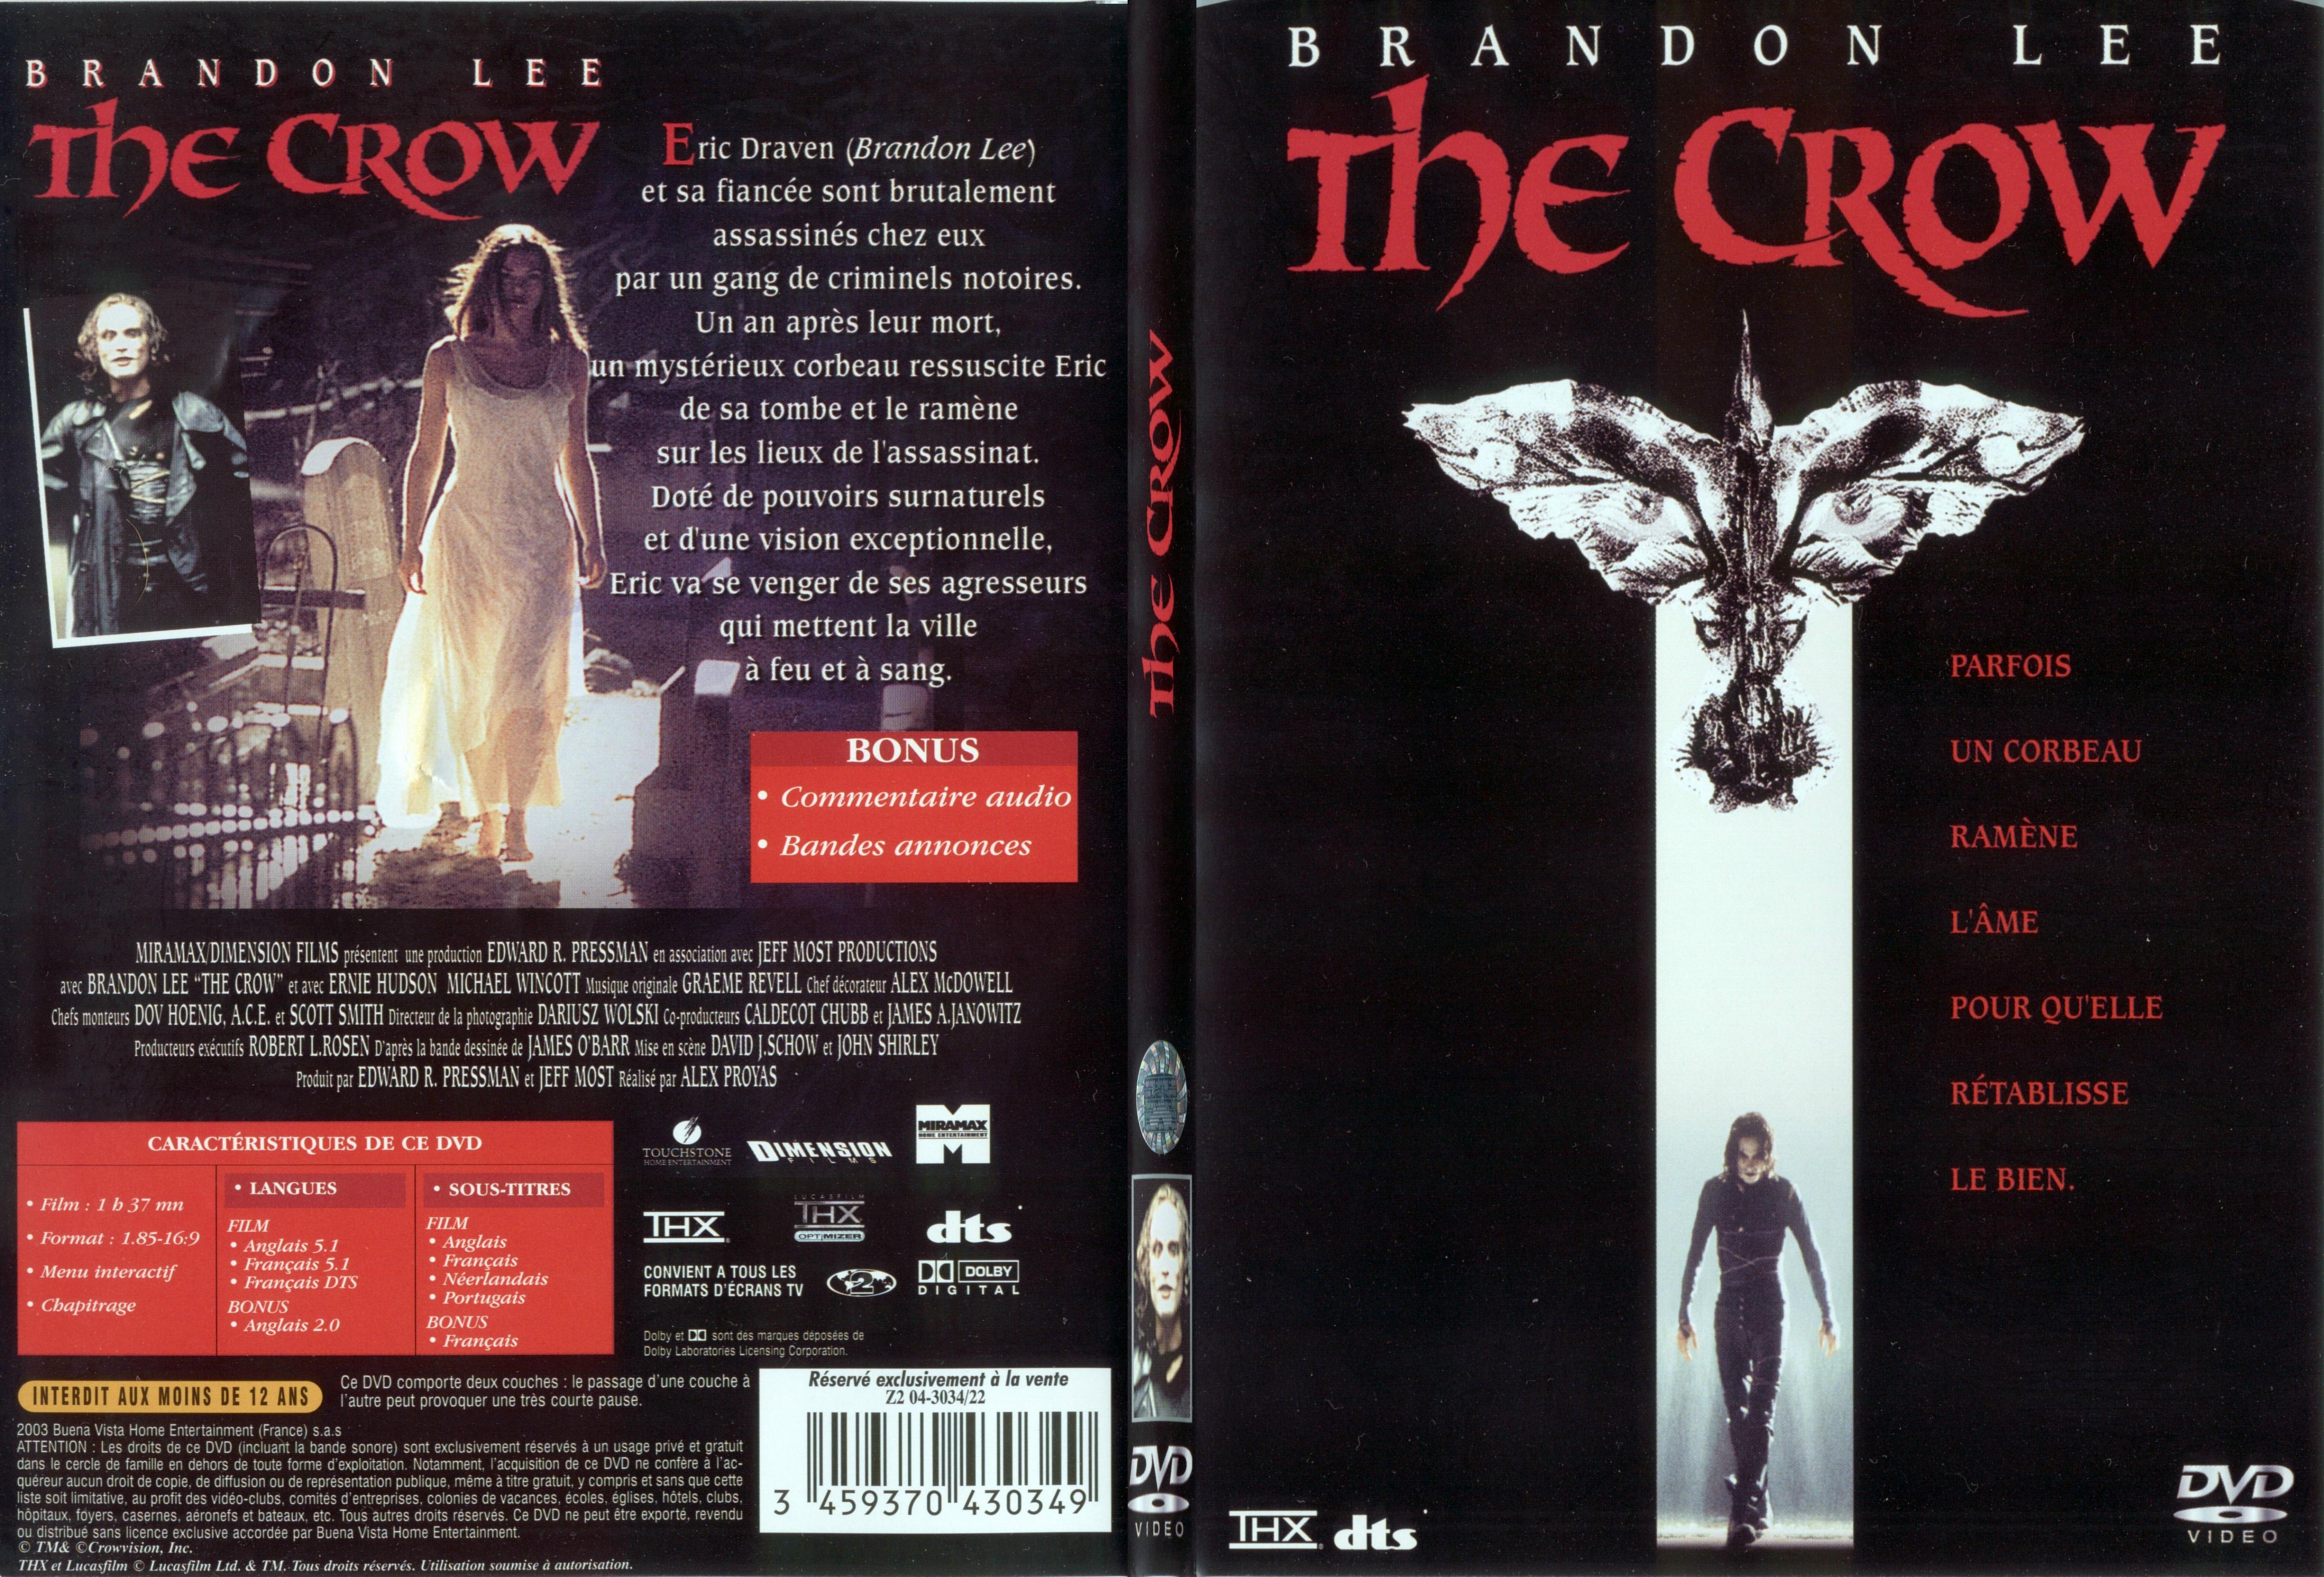 Jaquette DVD The crow - SLIM